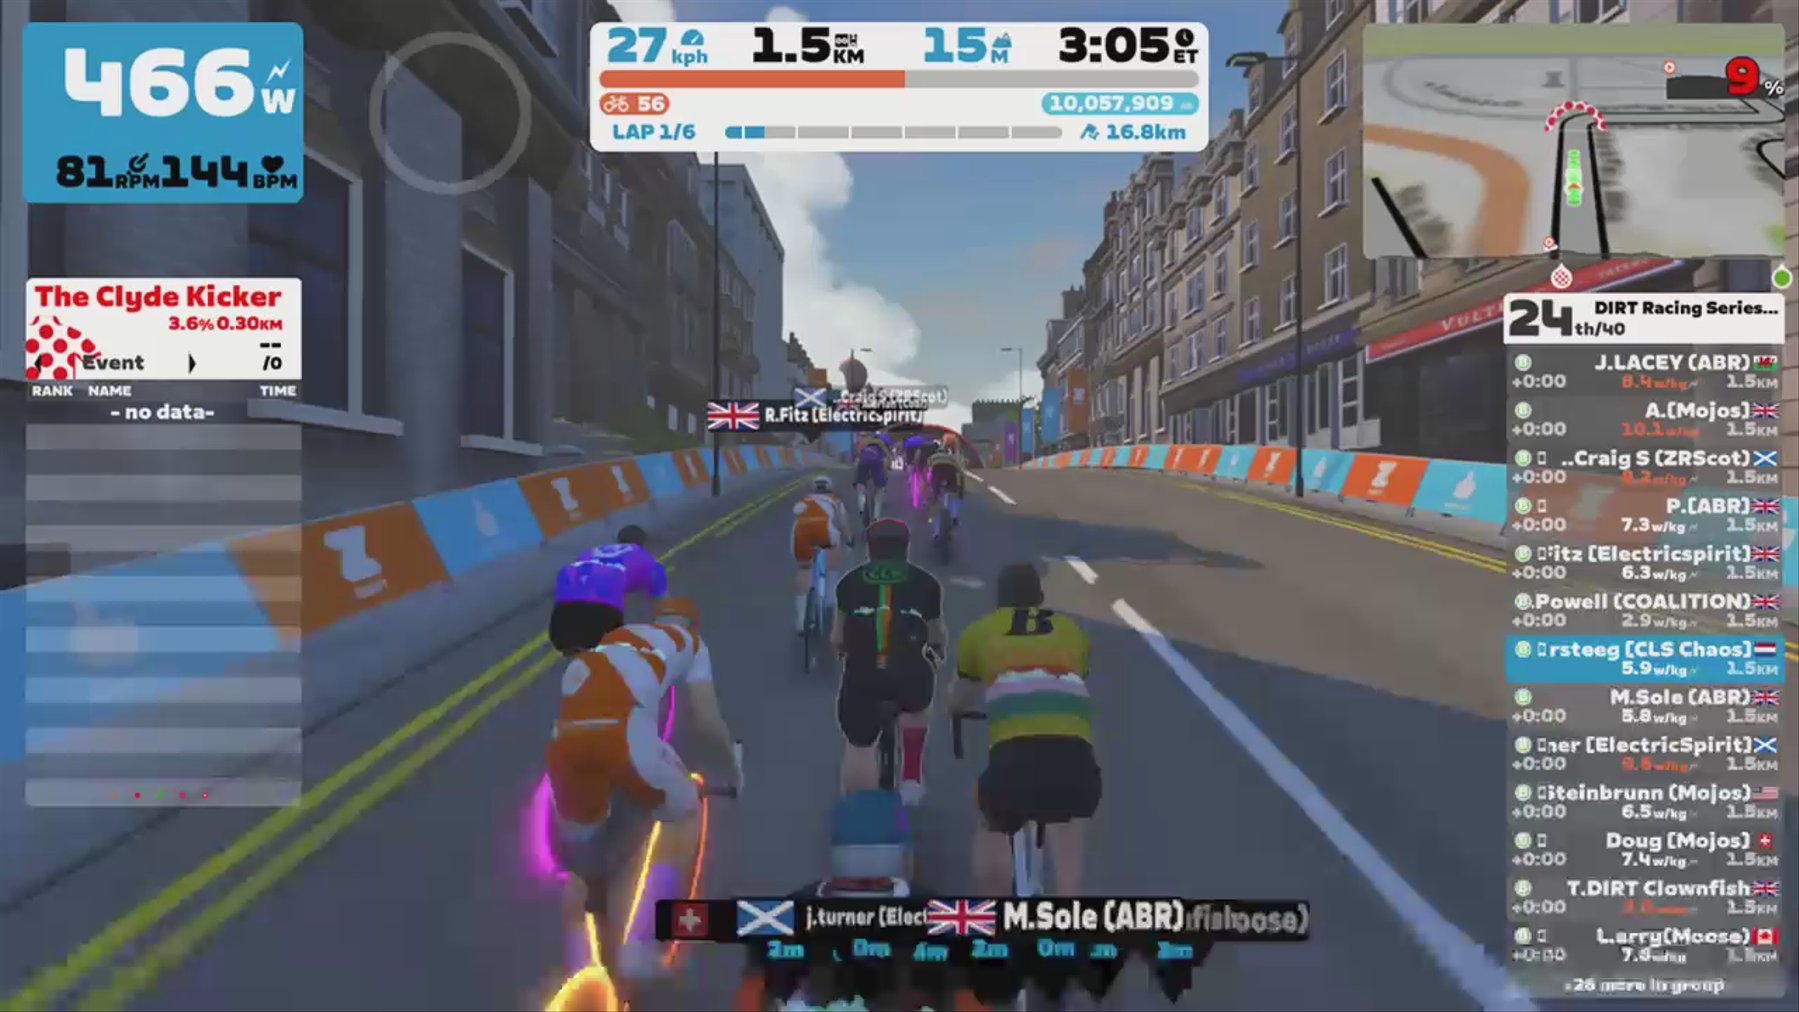 Zwift - Race: DIRT Racing Series - Rionda - Metals - Stage 7 (B) on Glasgow Crit Circuit in Scotland